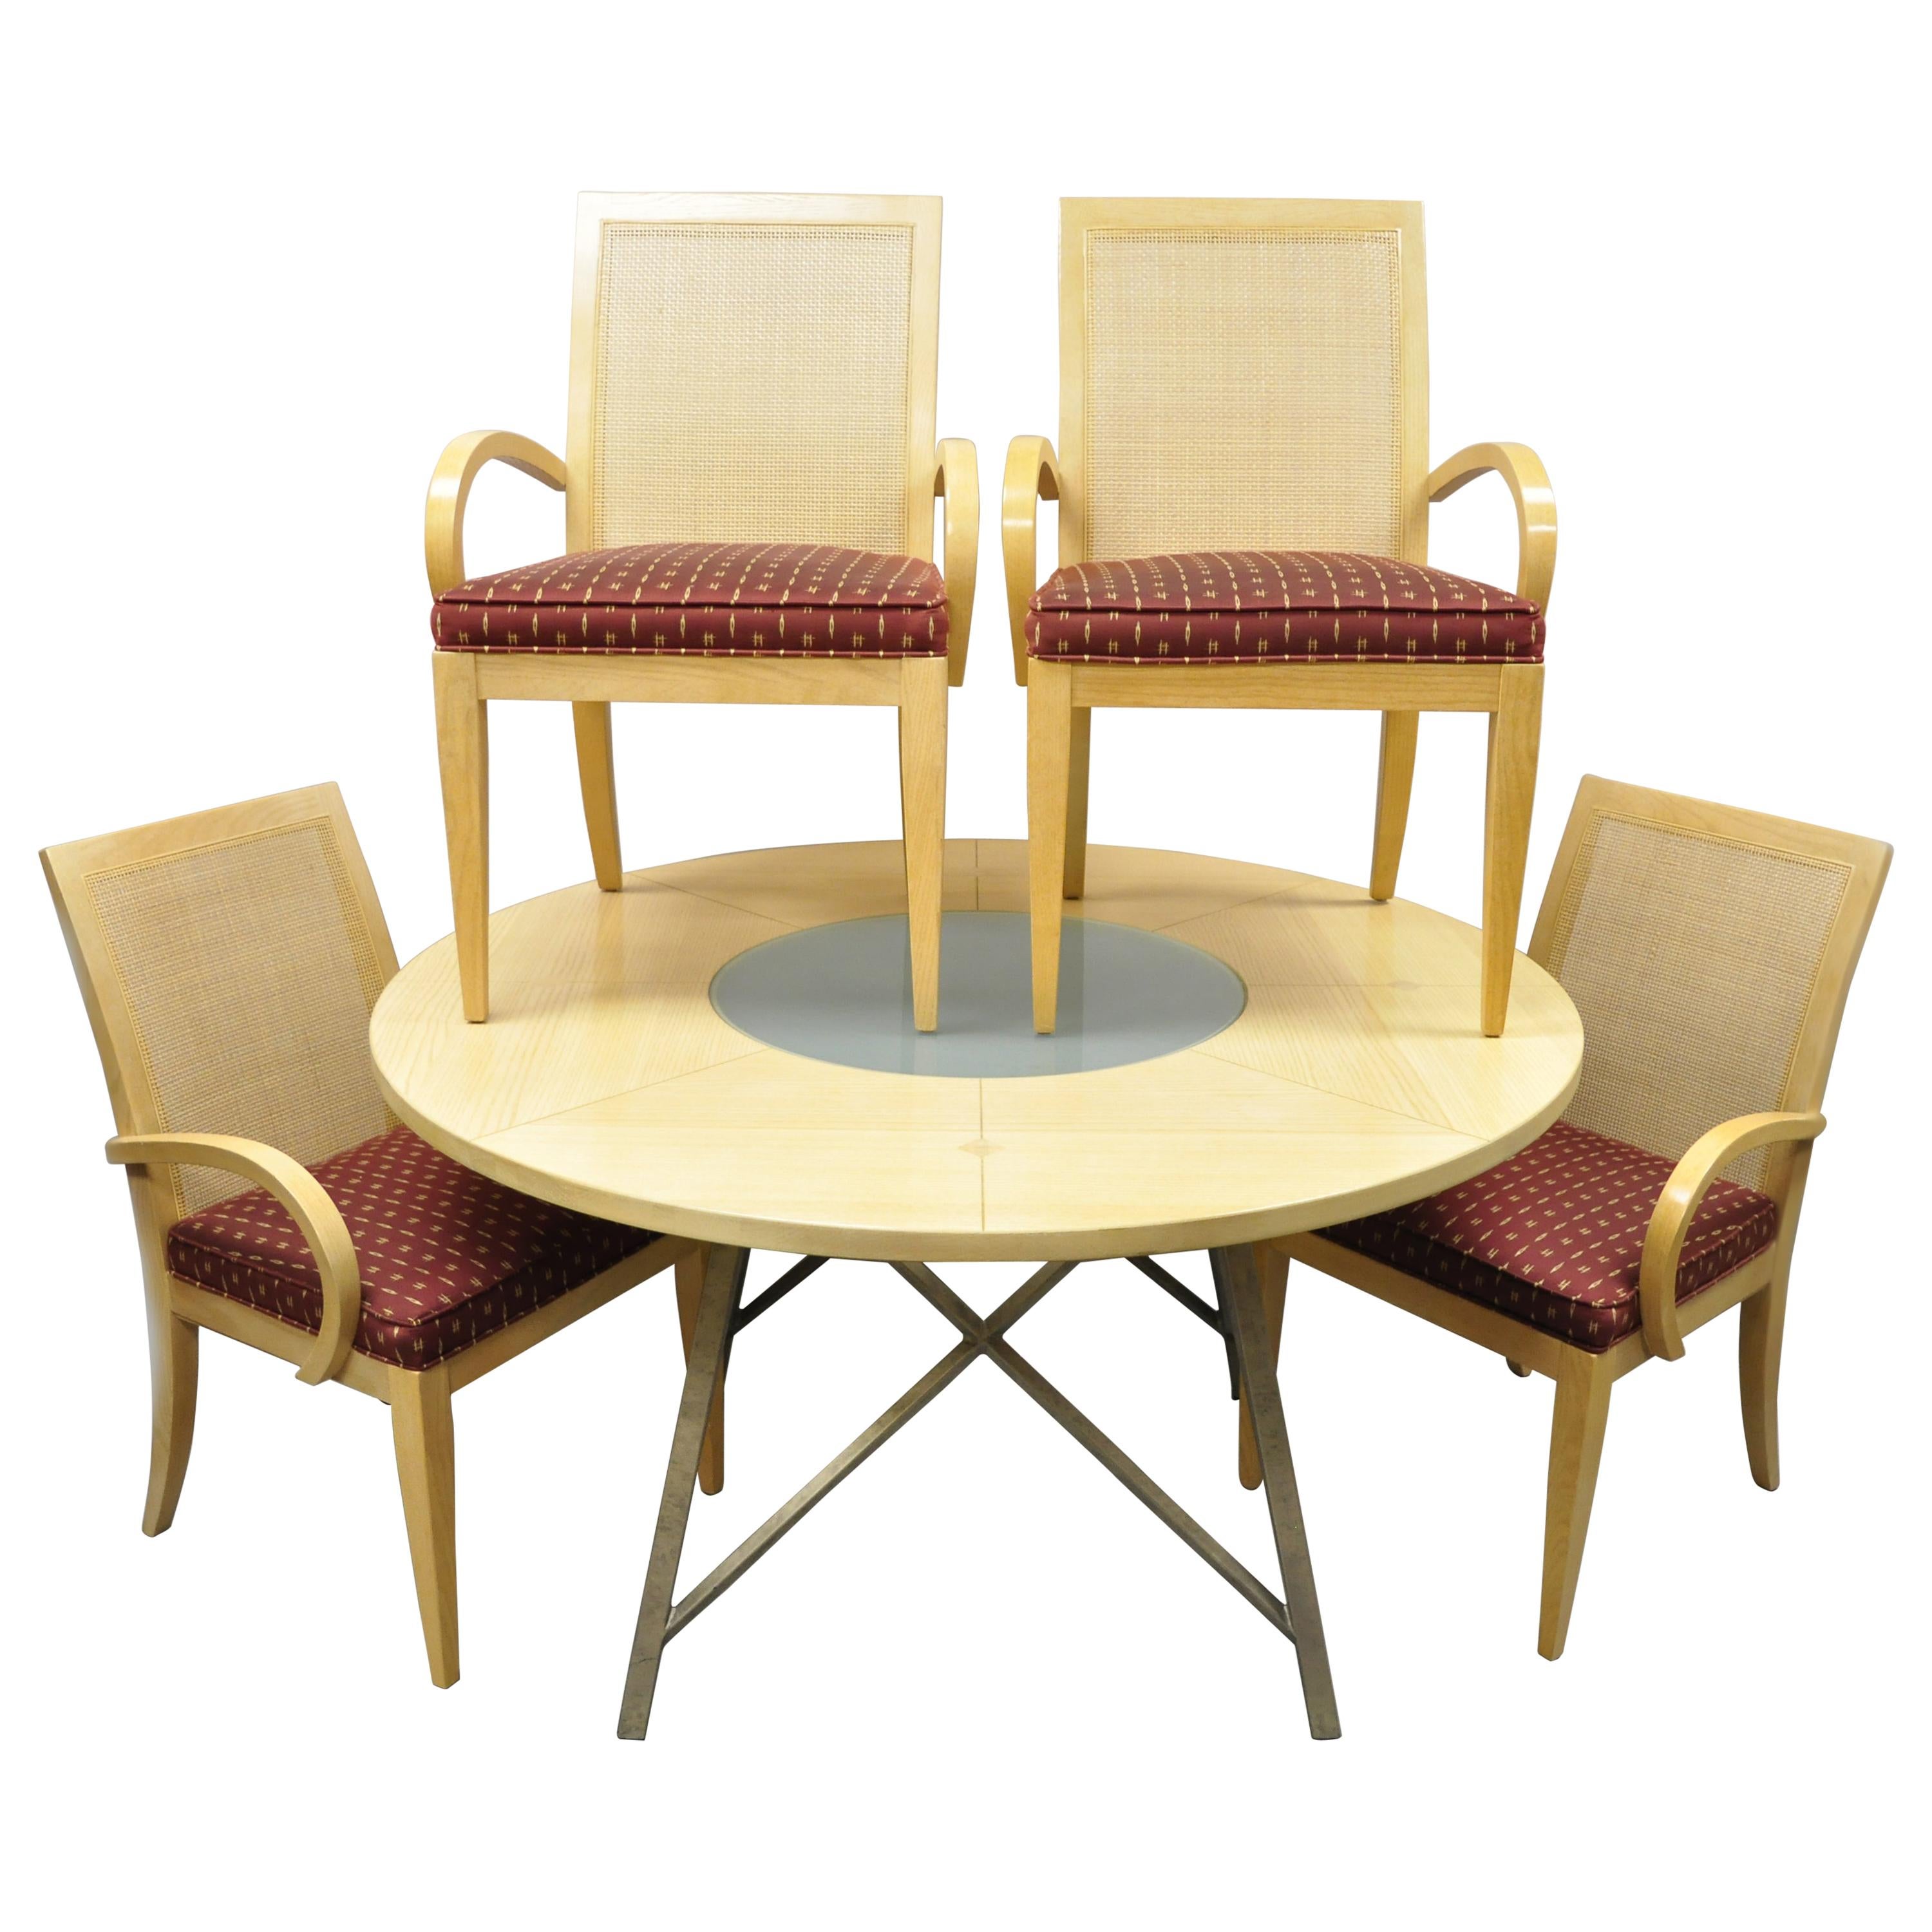 Drexel Heritage Studio Contemporary Modern Blonde Wood Dining Set Table 4 Chairs